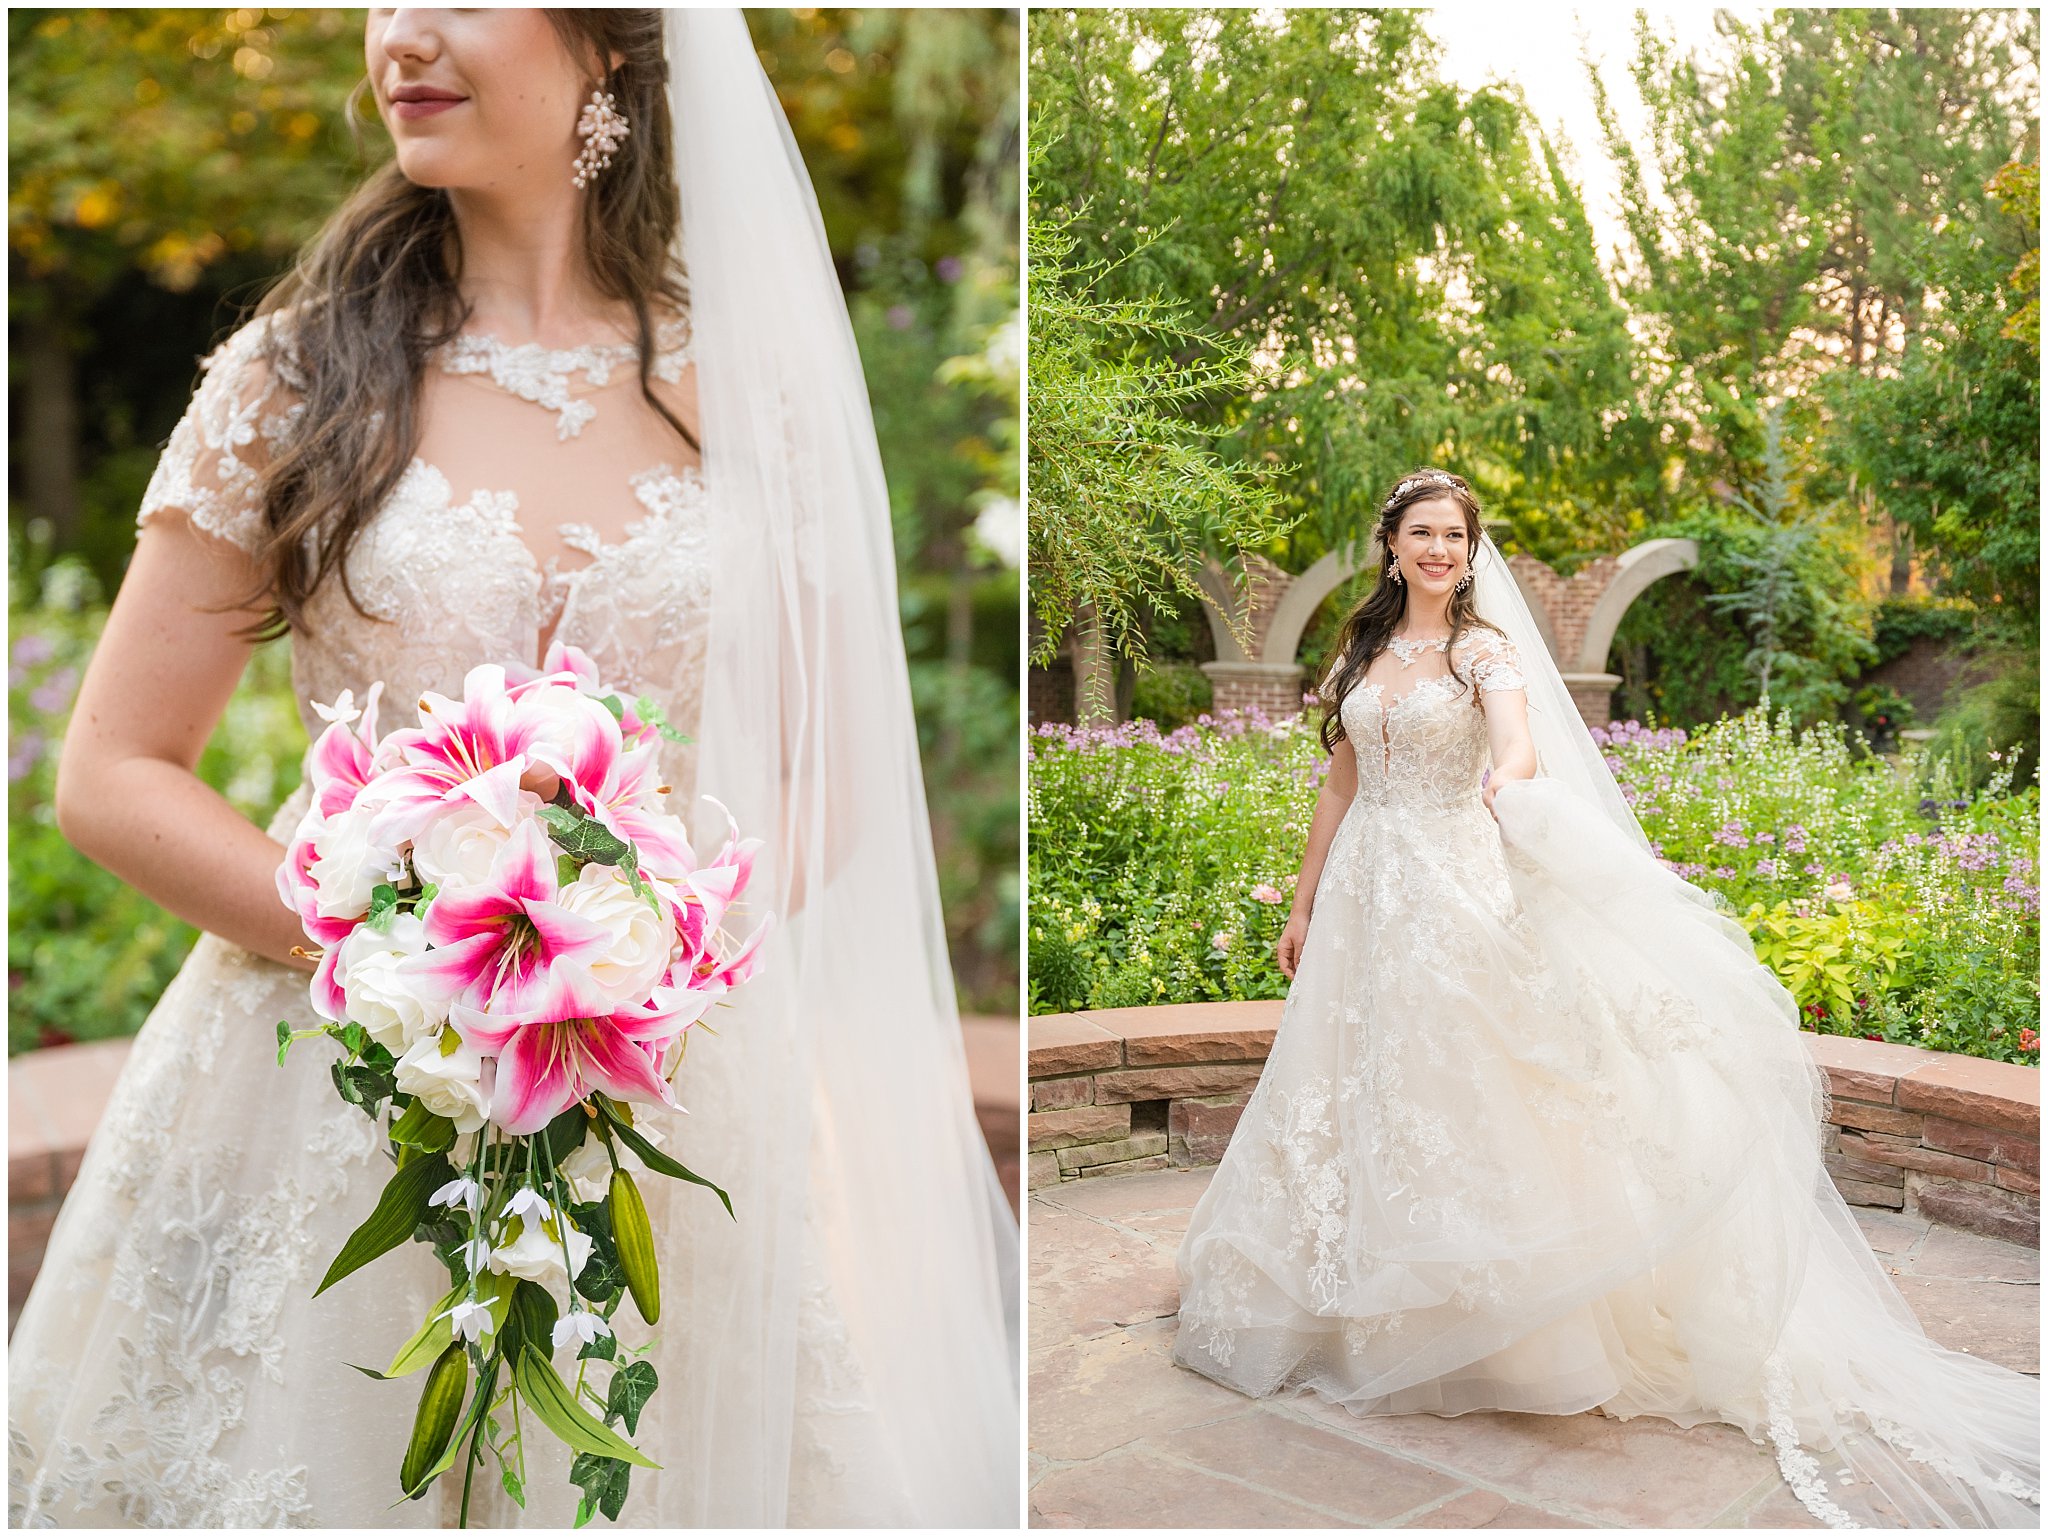 Bridal portraits during wedding portraits during the summer surrounded by flowers and gardens | Thanksgiving Point Ashton Garden Formal Session | Jessie and Dallin Photography